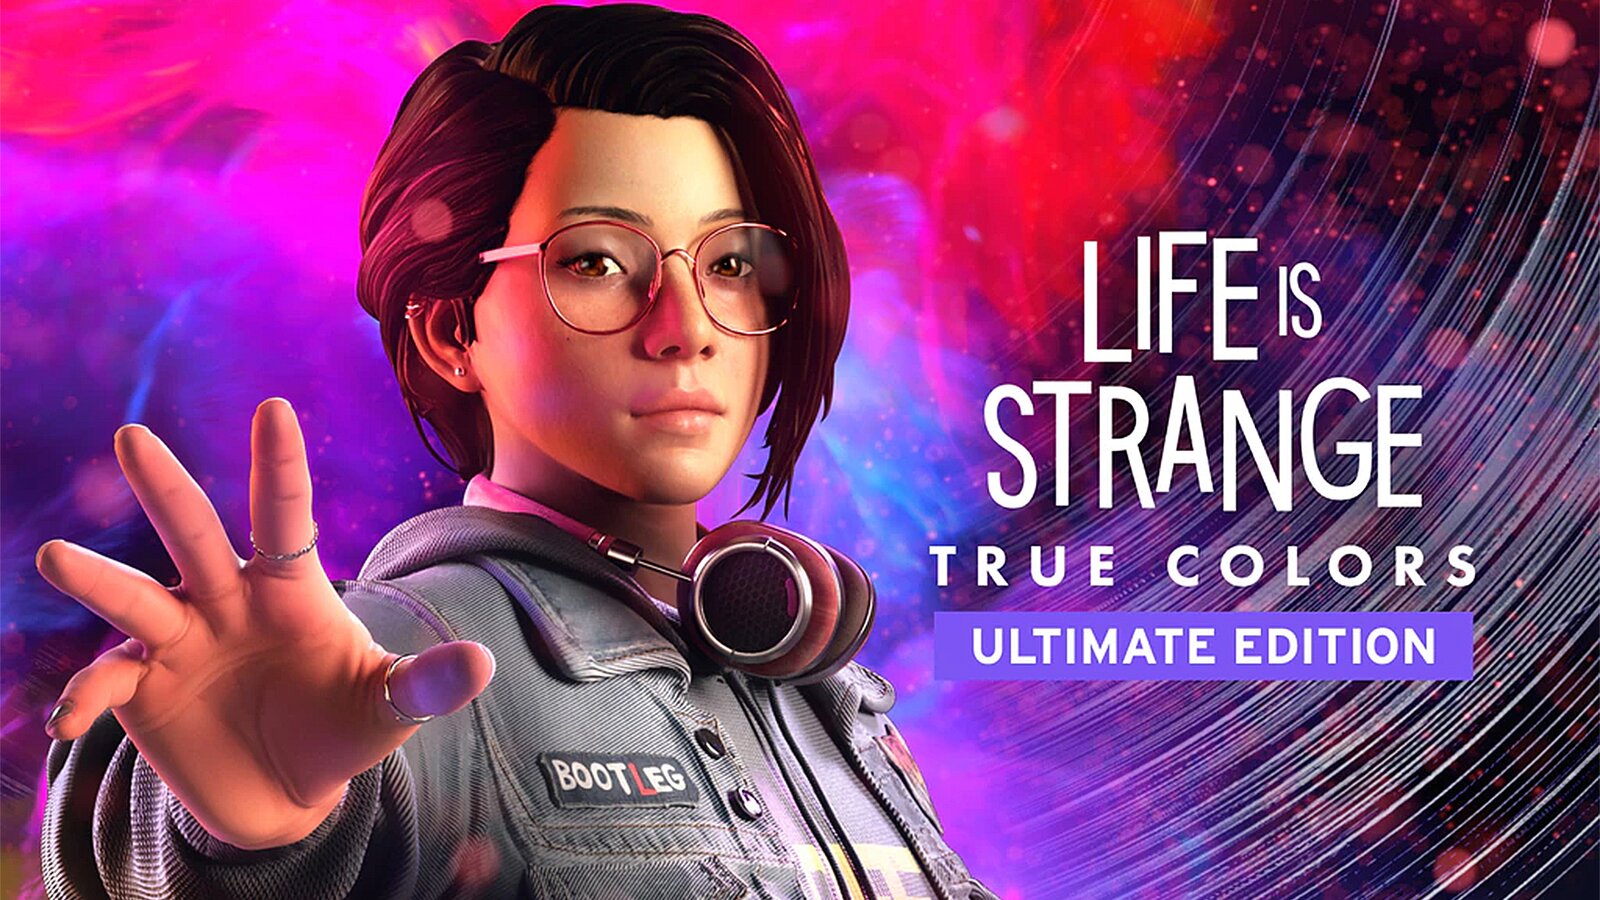 Life is Strange: True Colors - Ultimate Edition